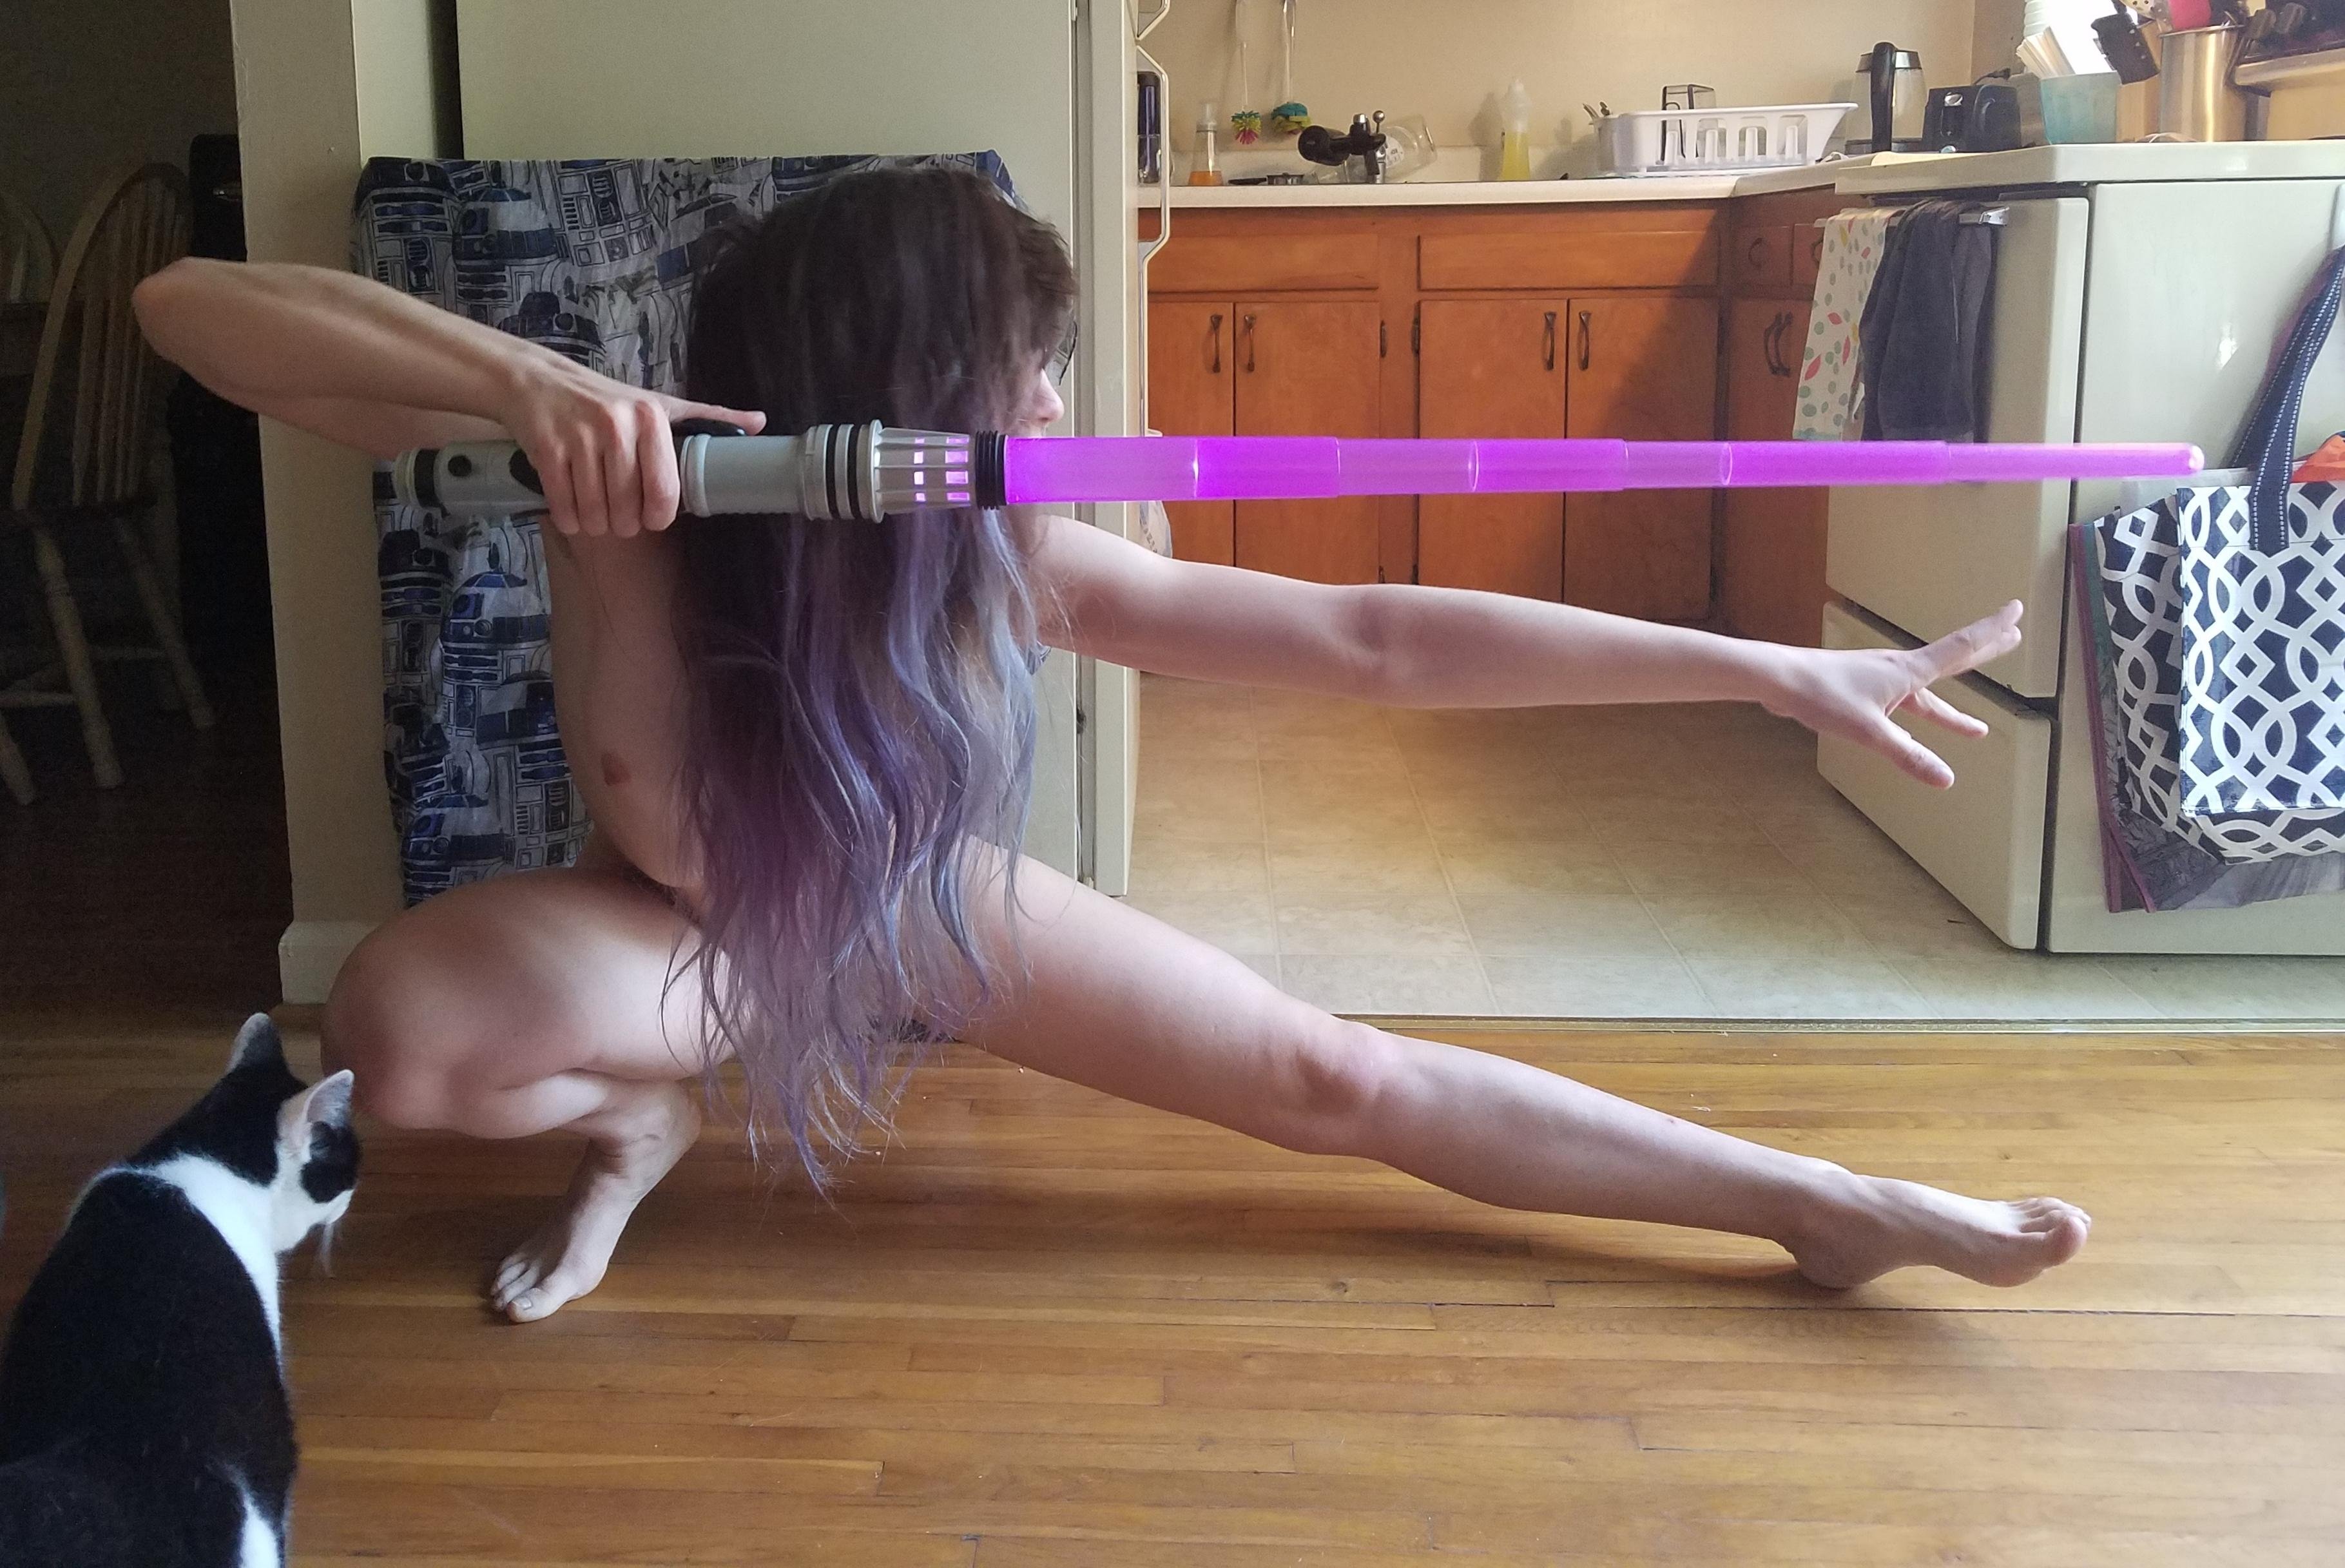 I collect lightsabers - can I see yours? [f] ♡